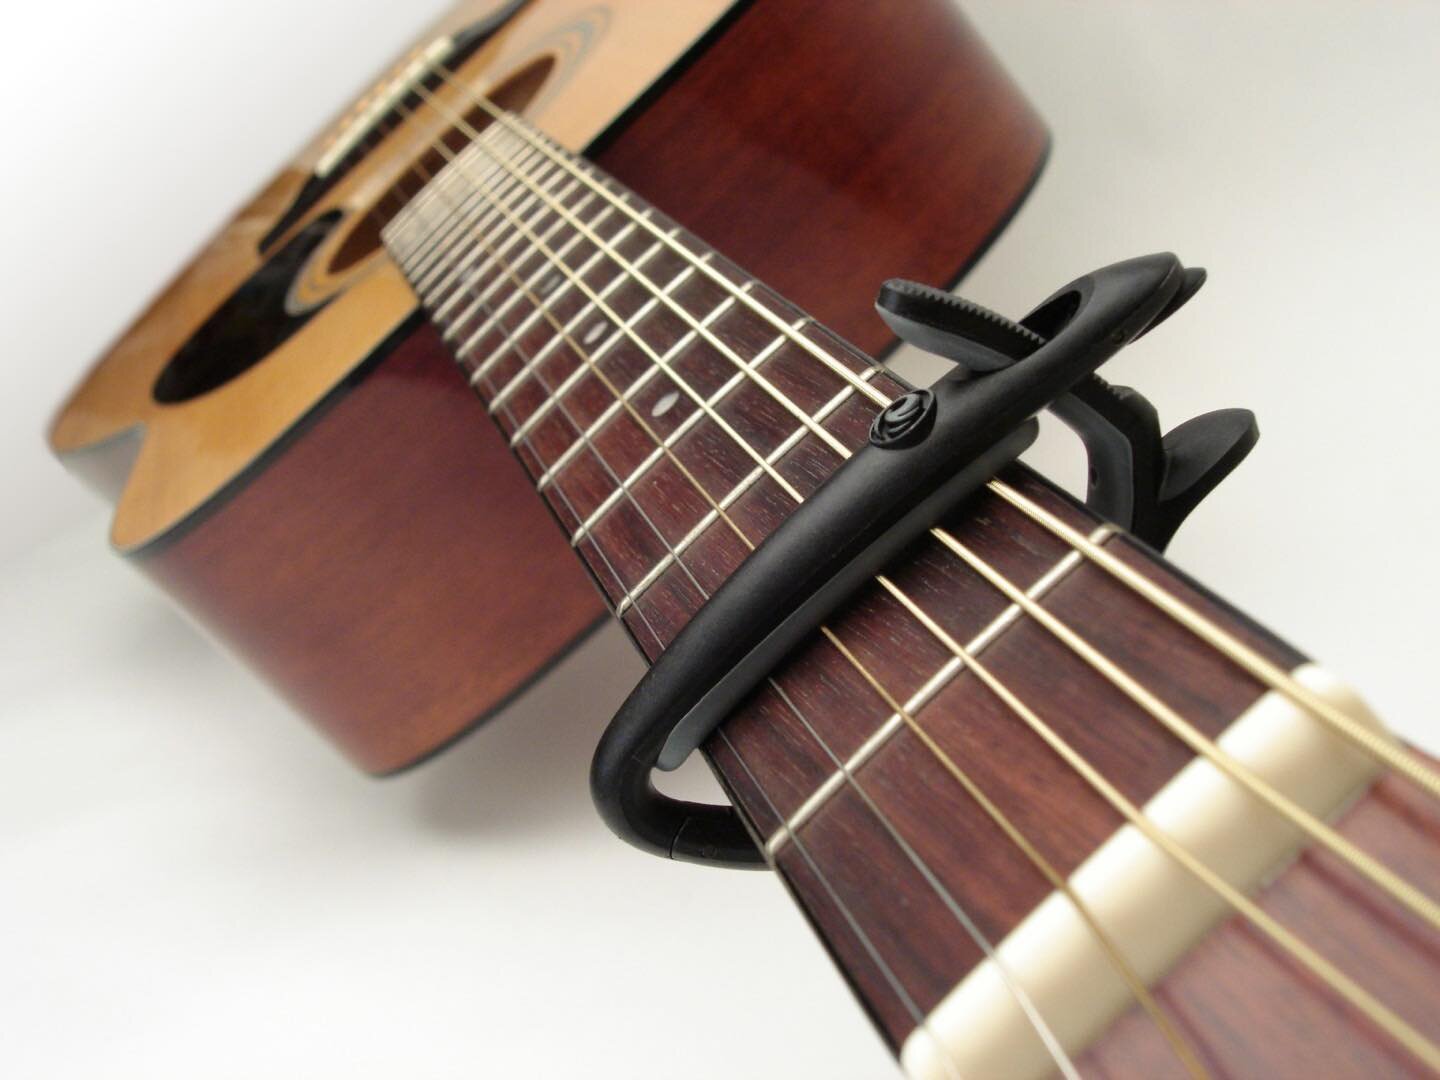 Here&rsquo;s another throwback to a product we designed with the guitarist in mind. We were challenged to create a capo with a simple, intuitive, single-handed, motion to lock the strings in place where speed is of the essence. Our capo design for D&